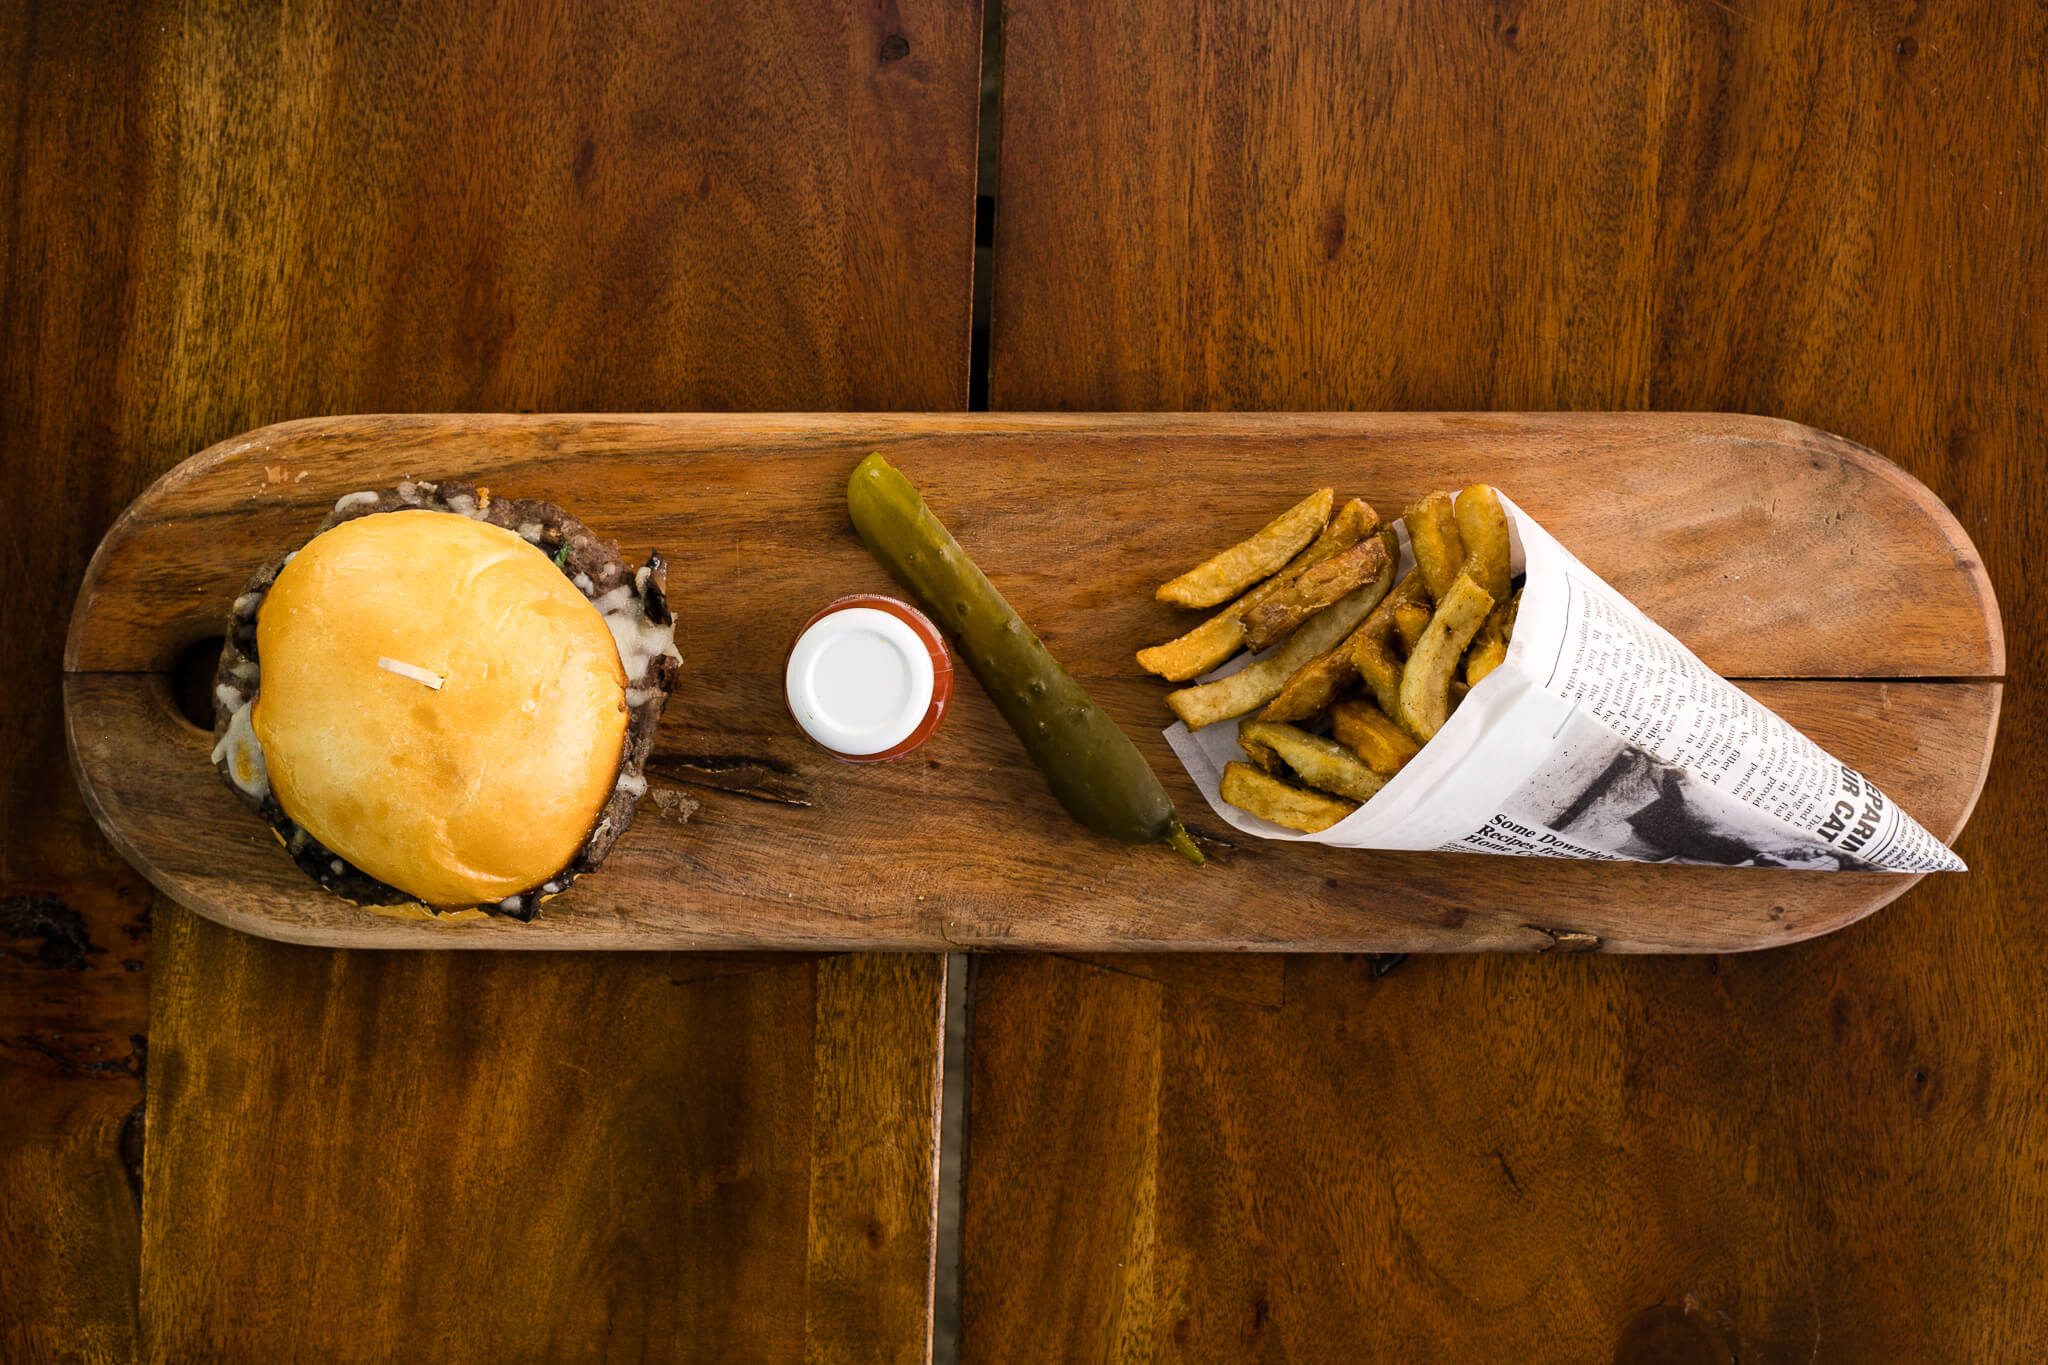 burger and fries and pickle image by JodyWall photographer